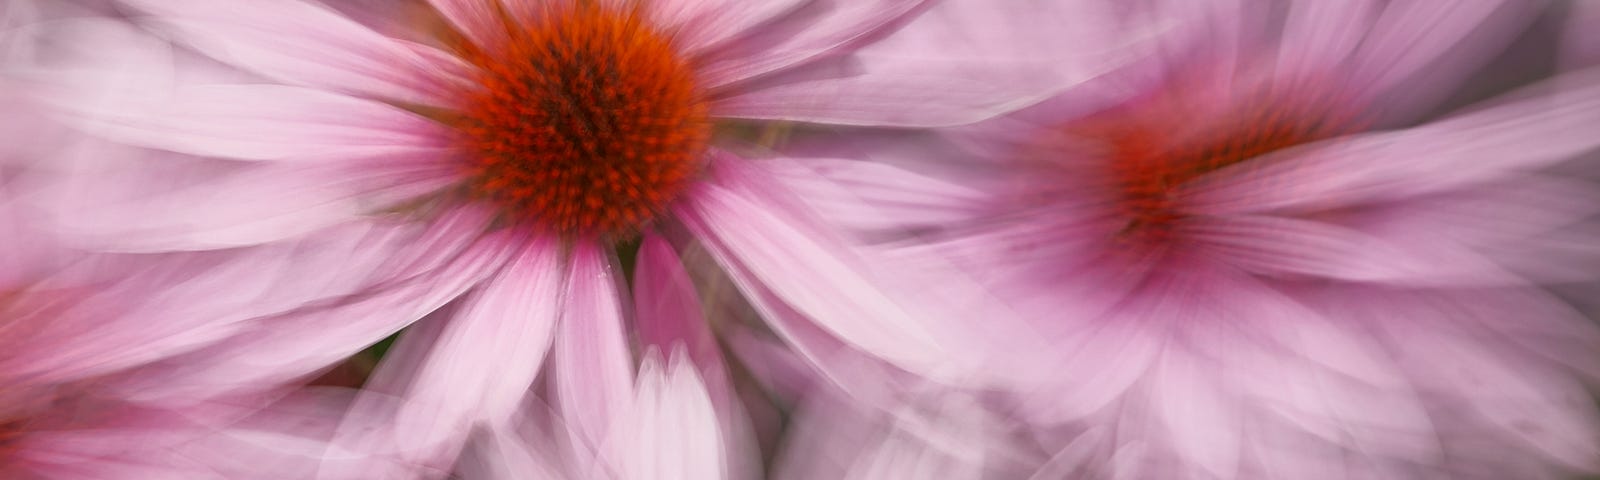 Pink daisies dance in the breeze of springtime